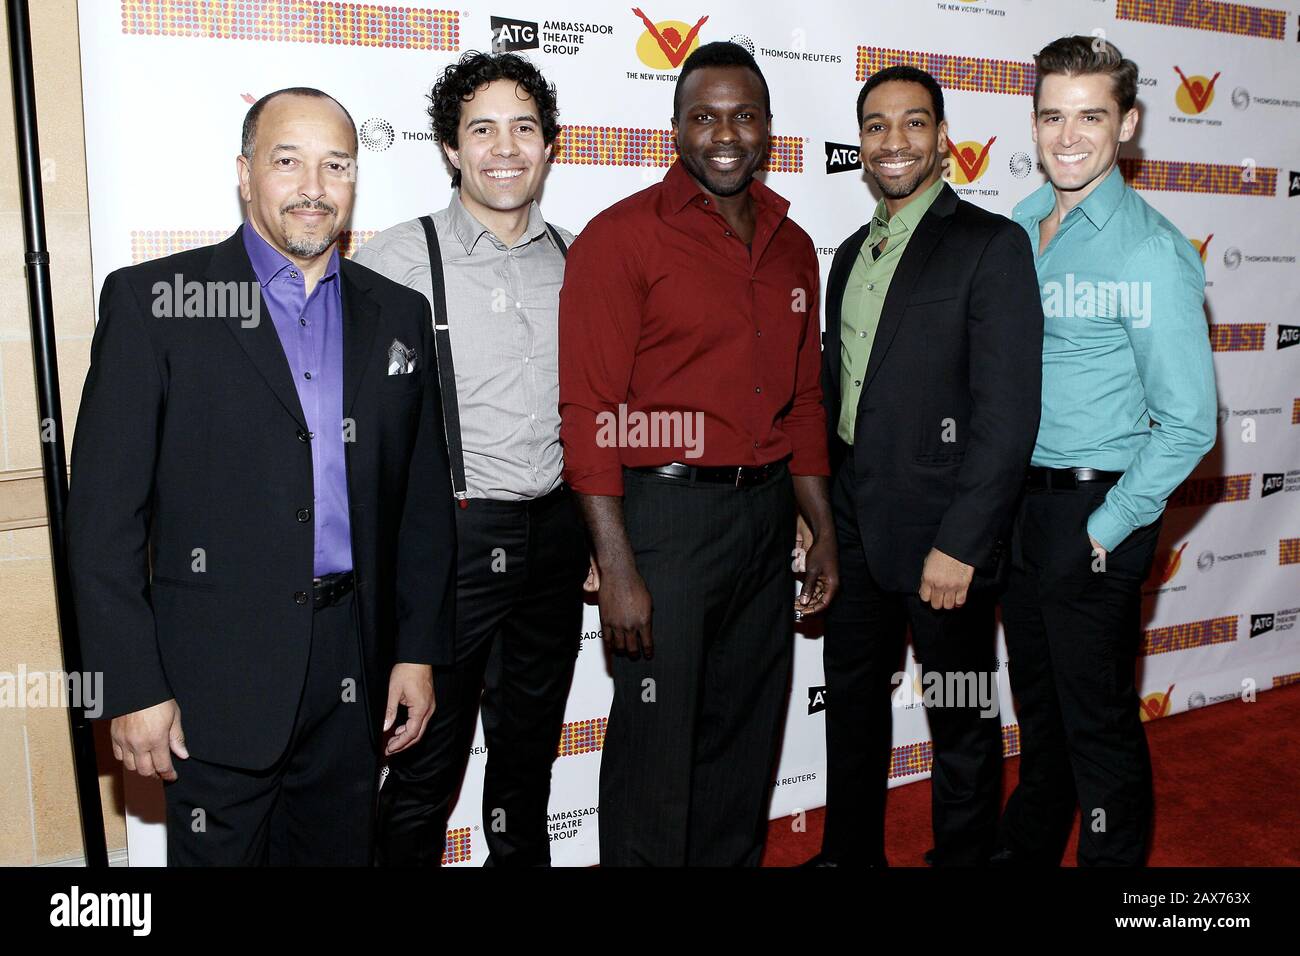 New York, NY, USA. 12 January, 2015. JC Montgomery, Jared Young, E. Clayton Cornelious (2nd from right), Travis Nesbit at the New 42nd Street 2015 Gala at the Lyric Theatre. Credit: Steve Mack/Alamy Stock Photo